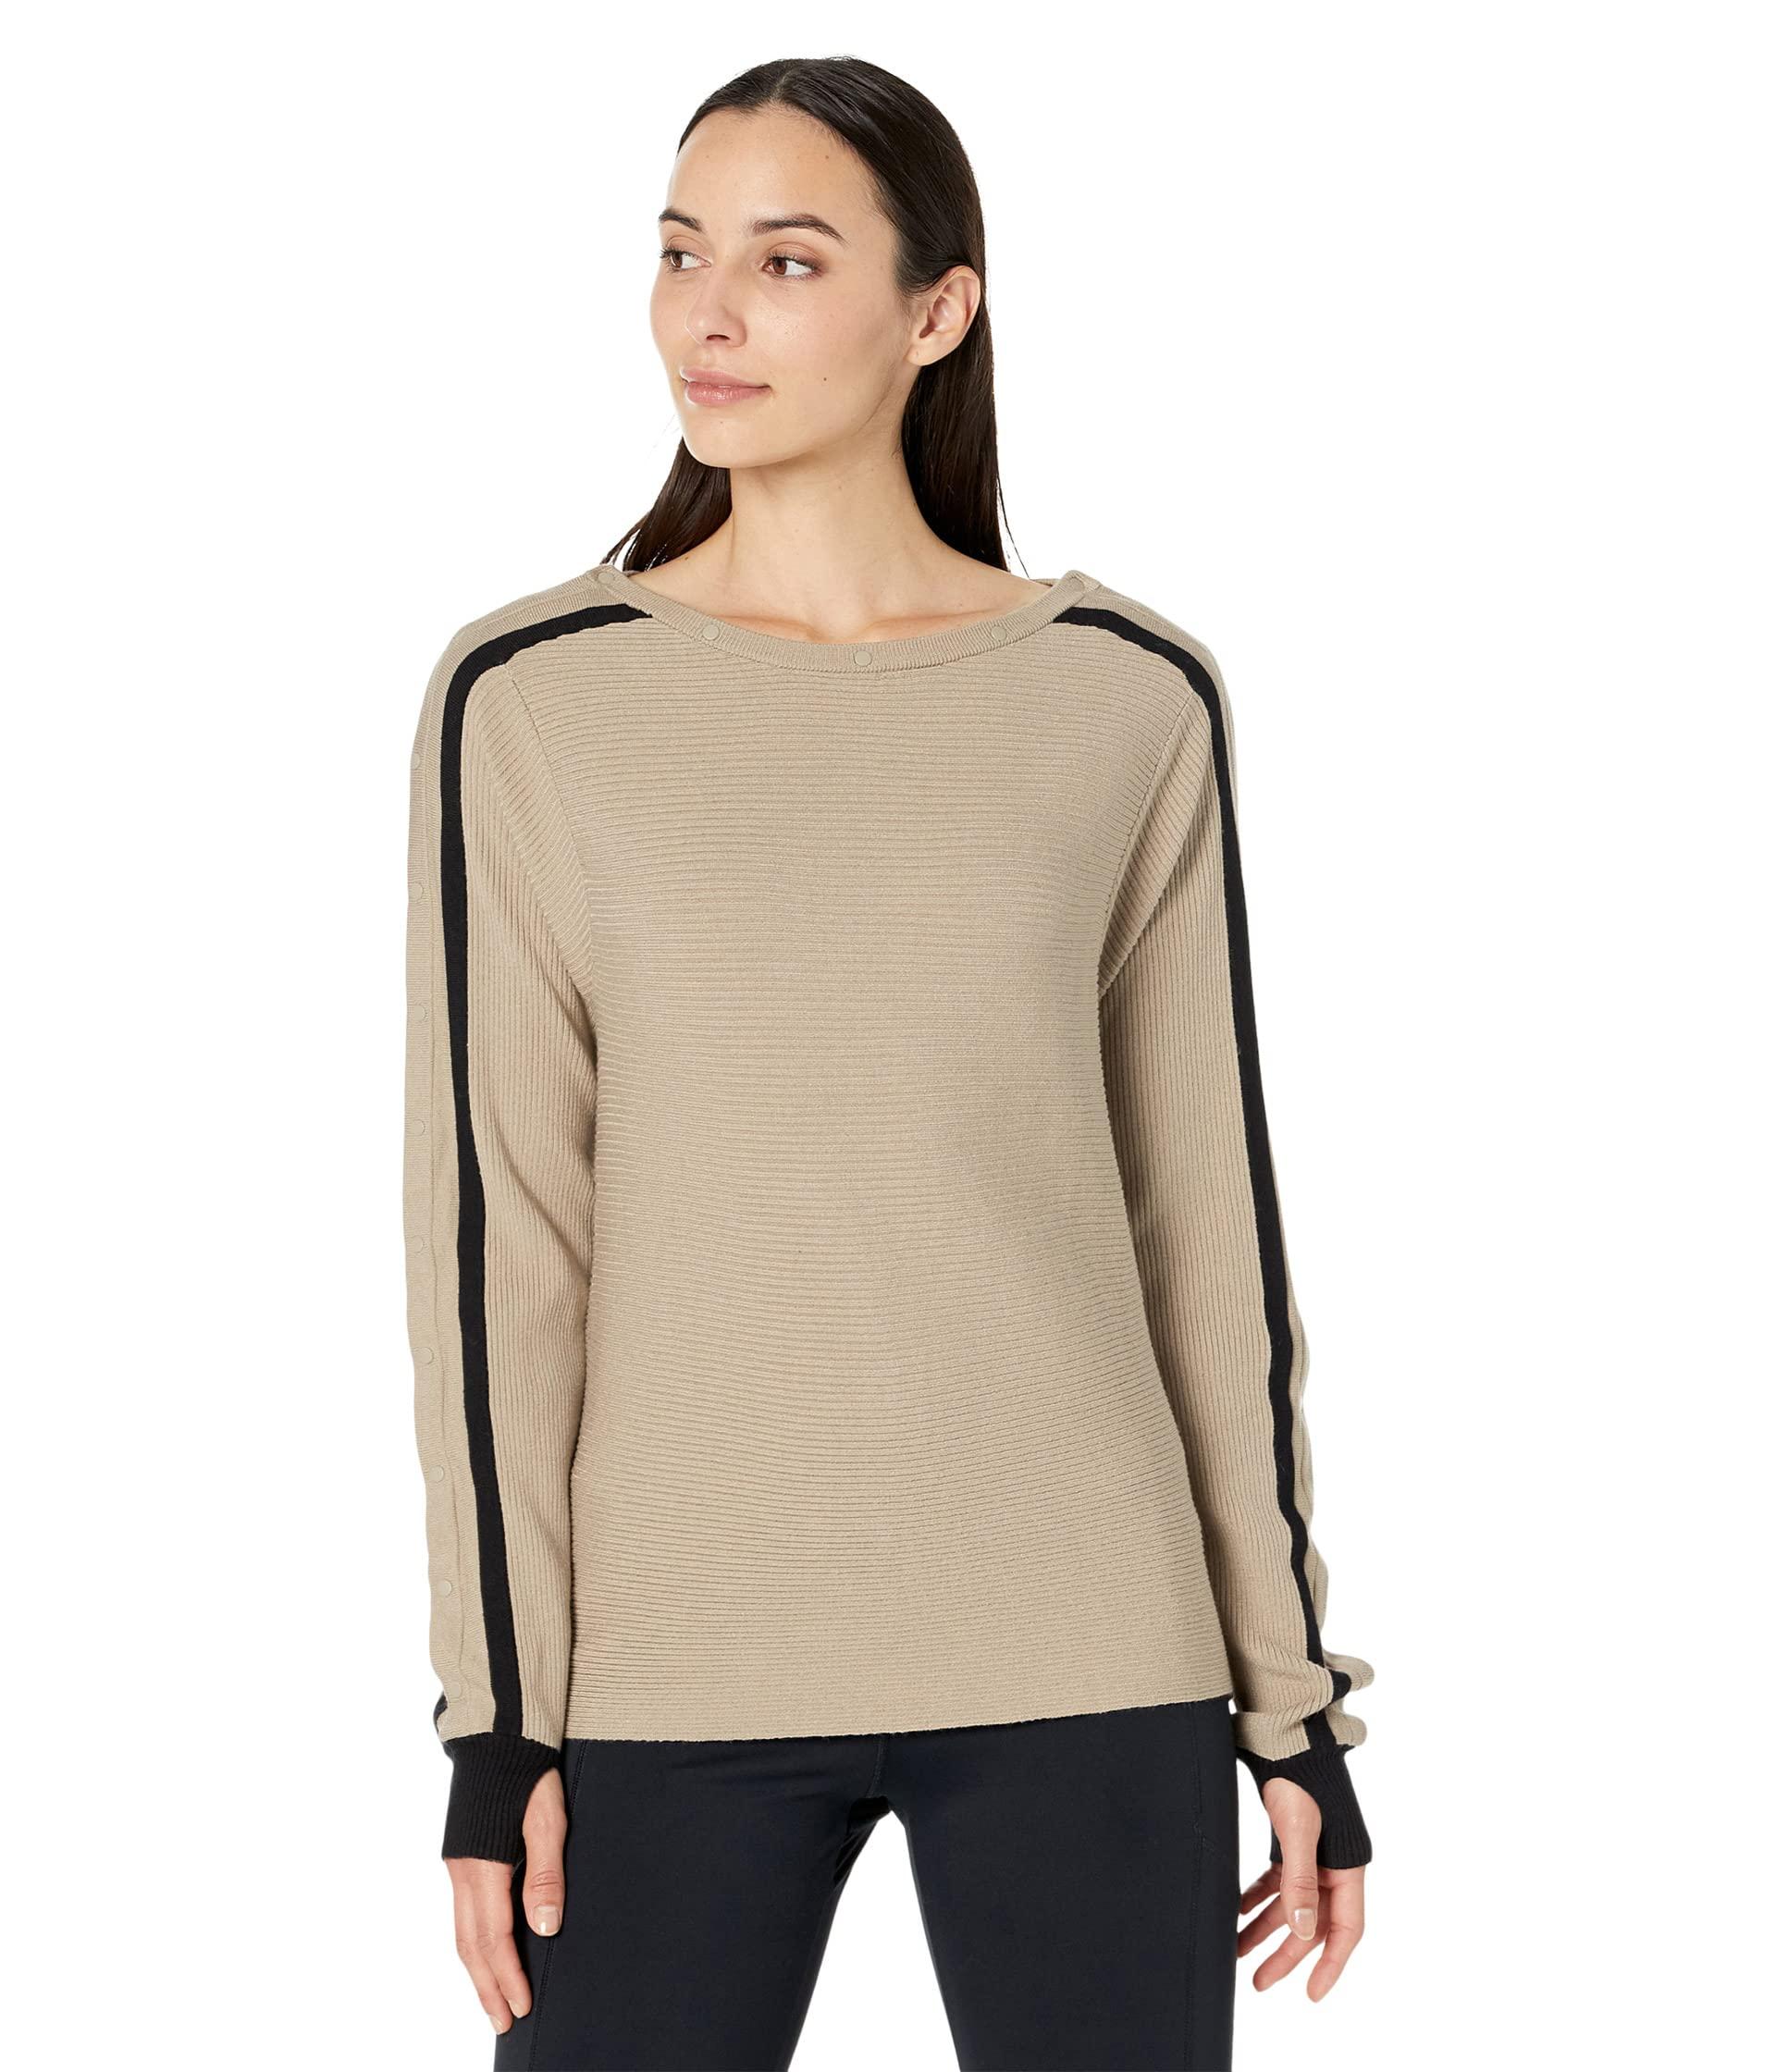 BLANC NOIR Sporty Portola Sweater in Natural | Lyst